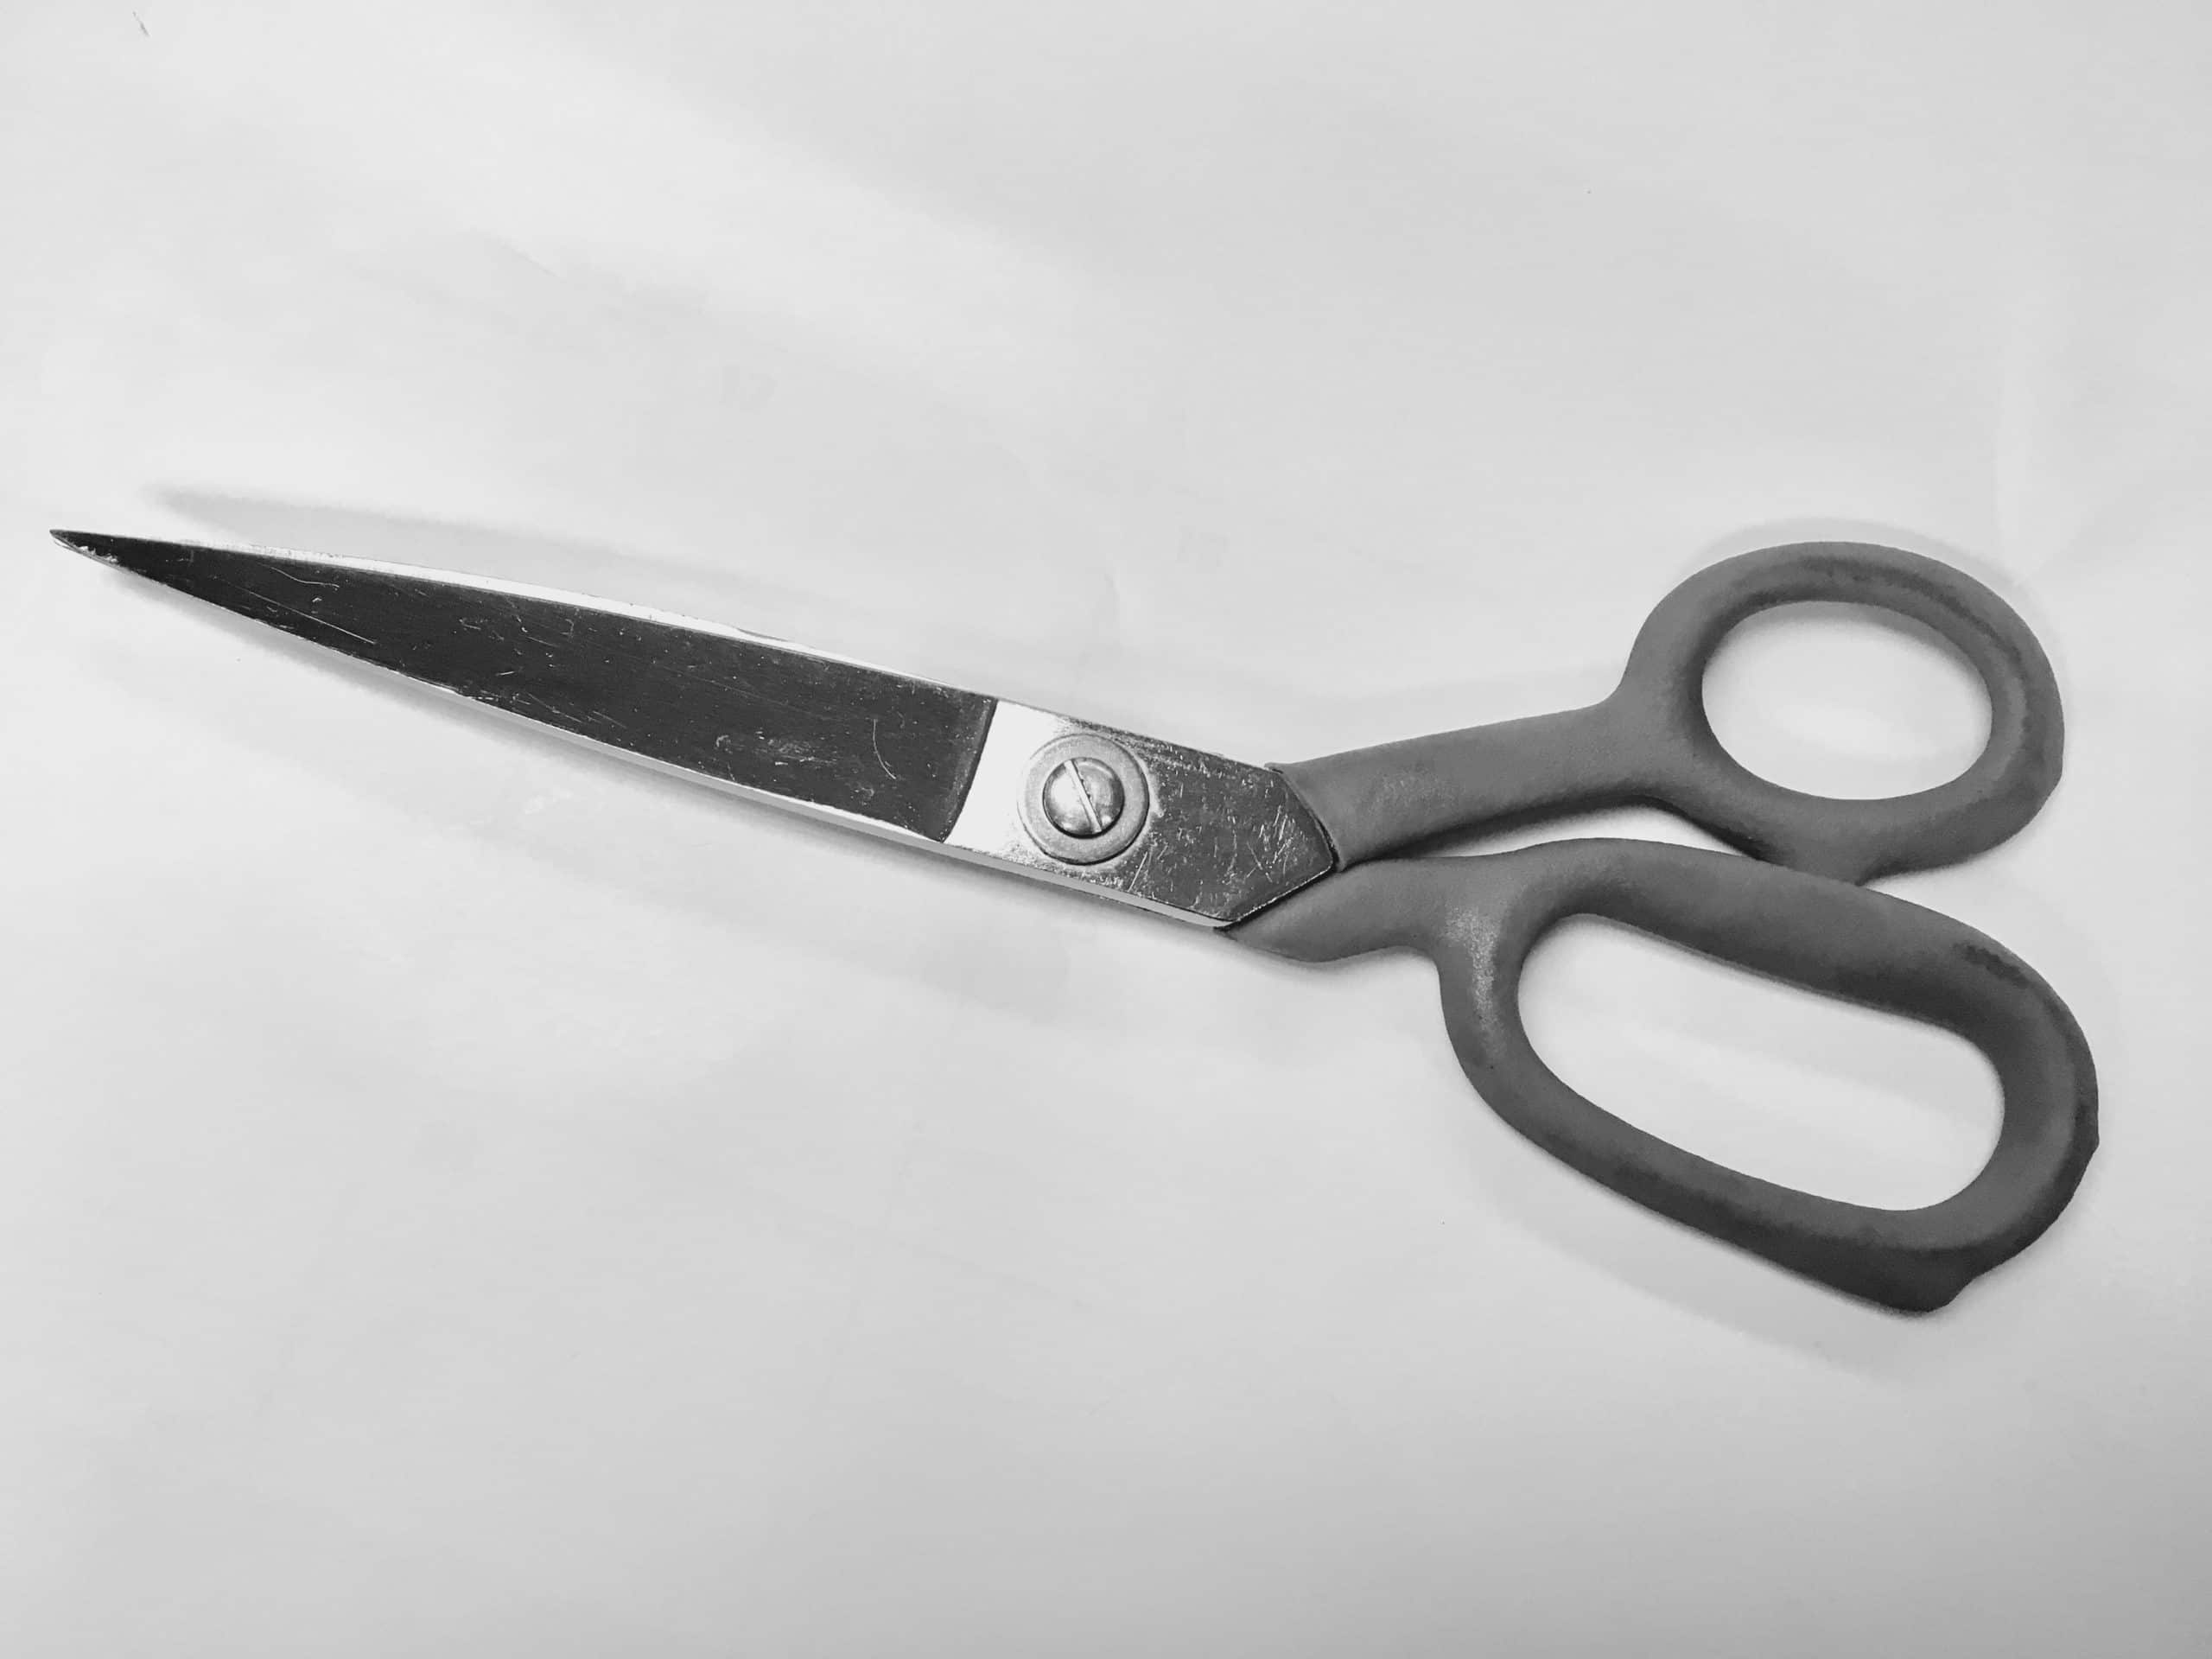 High quality smooth cutting shears / scissors - Bond Products Inc